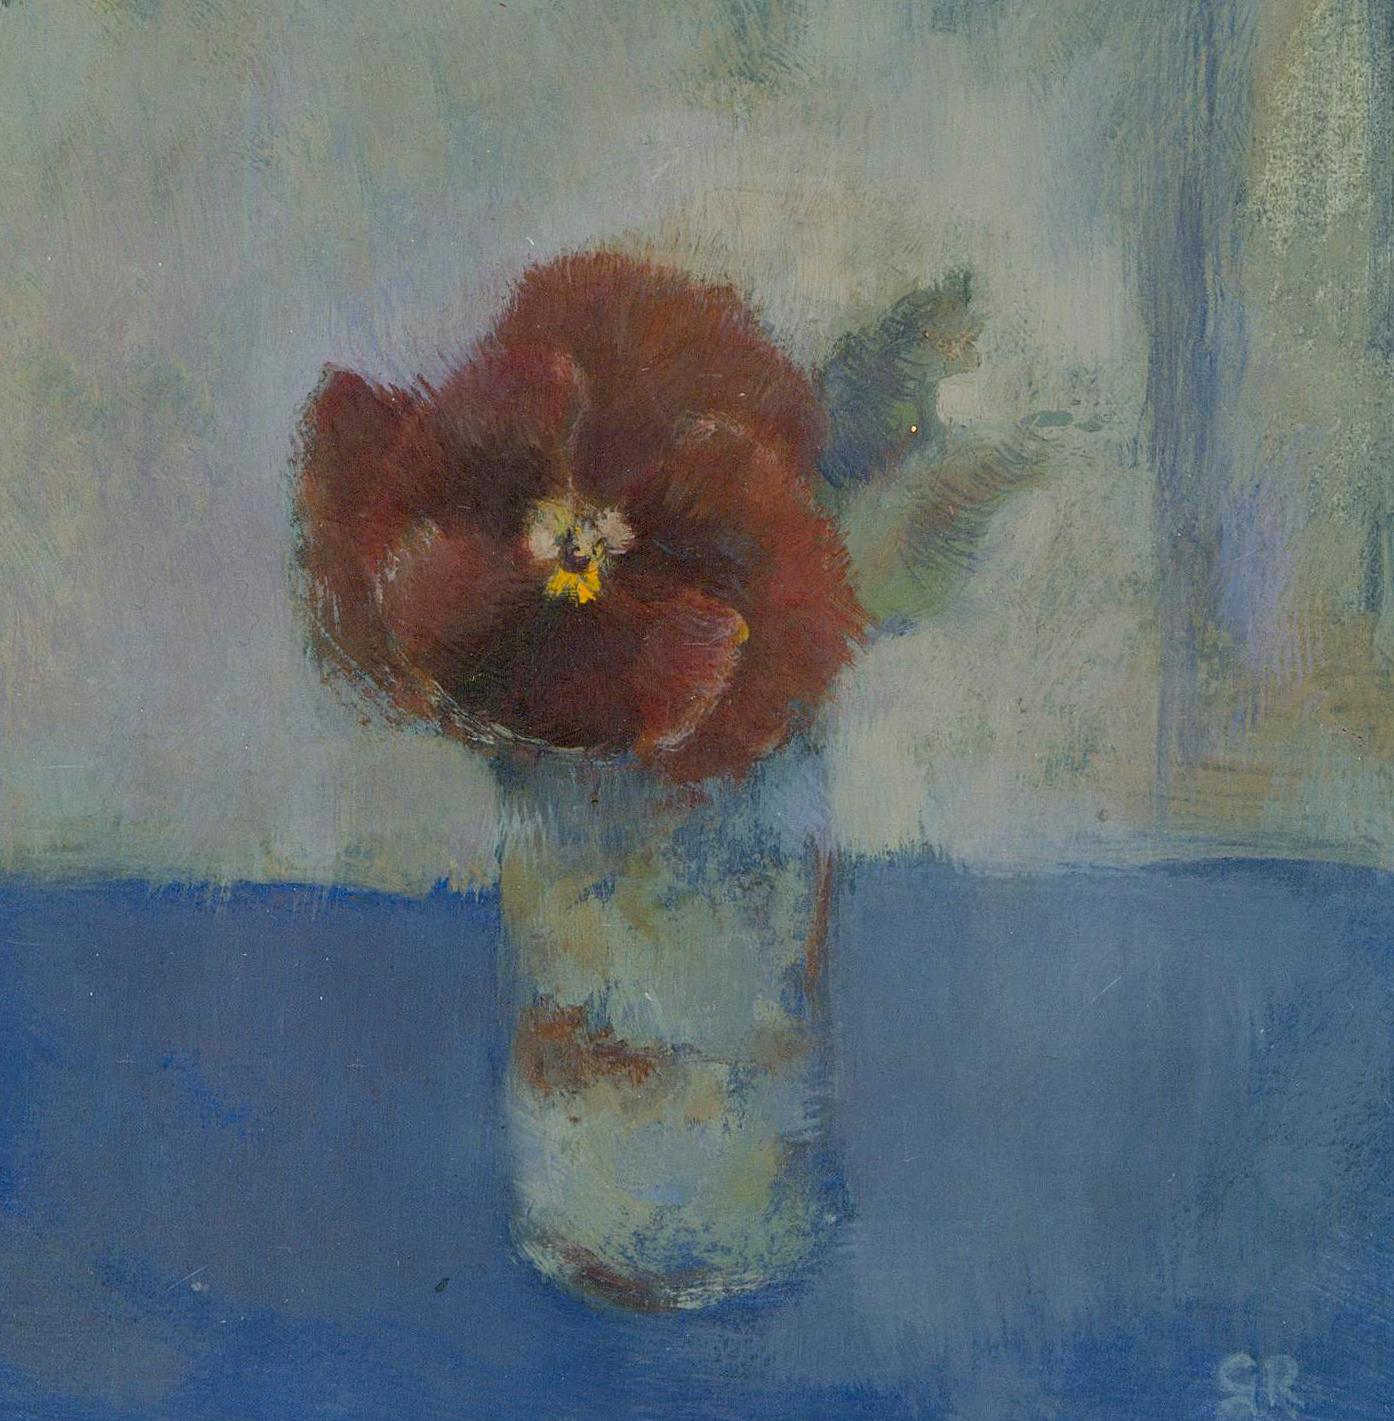 G.R - Framed Contemporary Oil, Flower in a Vase - Painting by Unknown